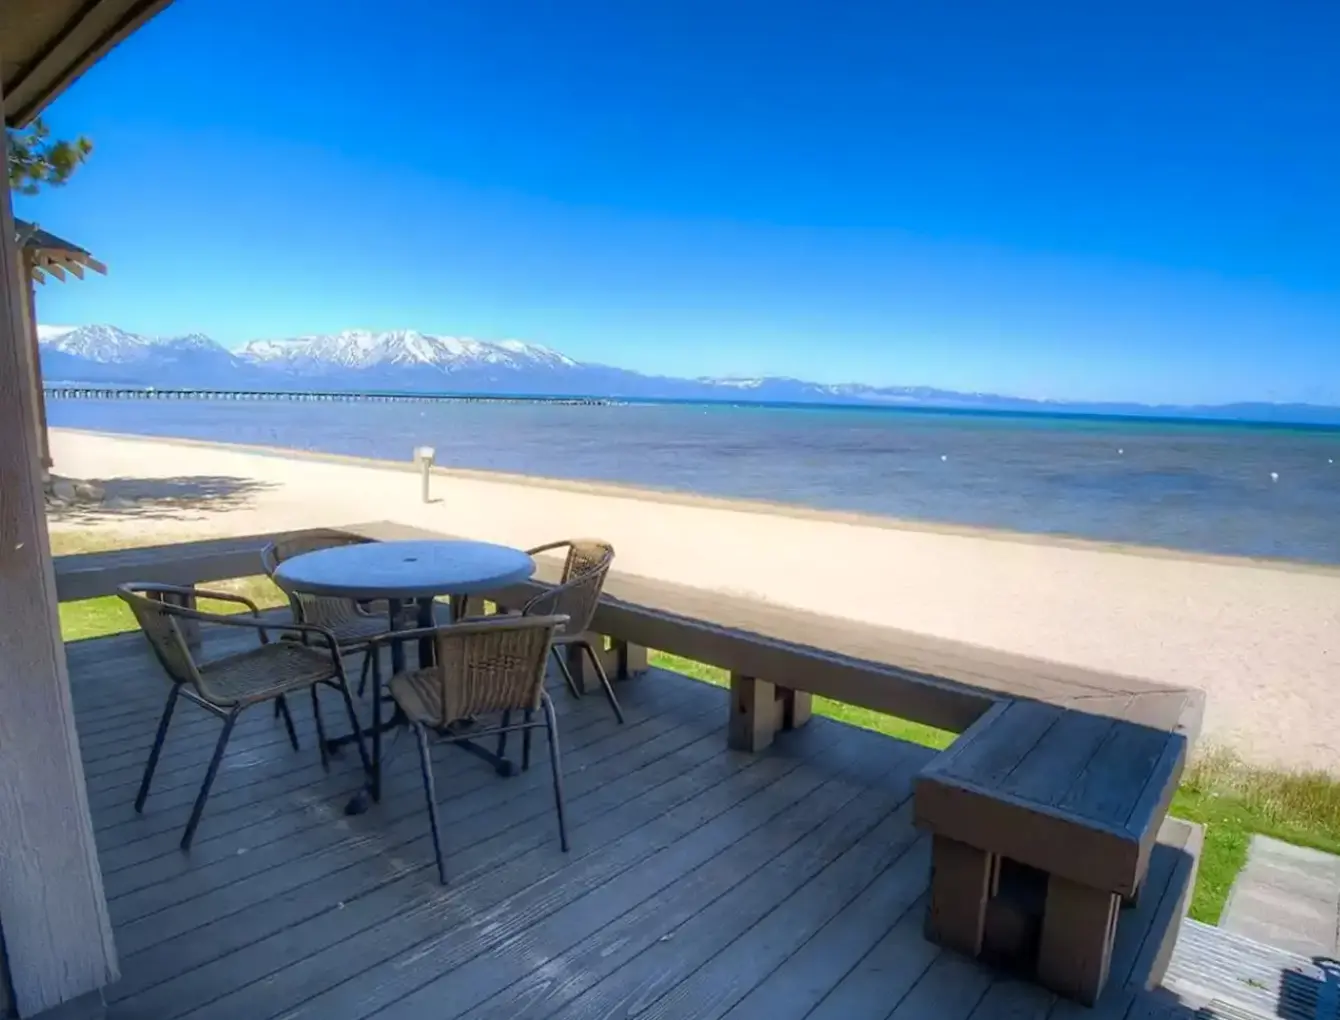 Vacation cabin rental in lake tahoe with deck directly positioned over beach